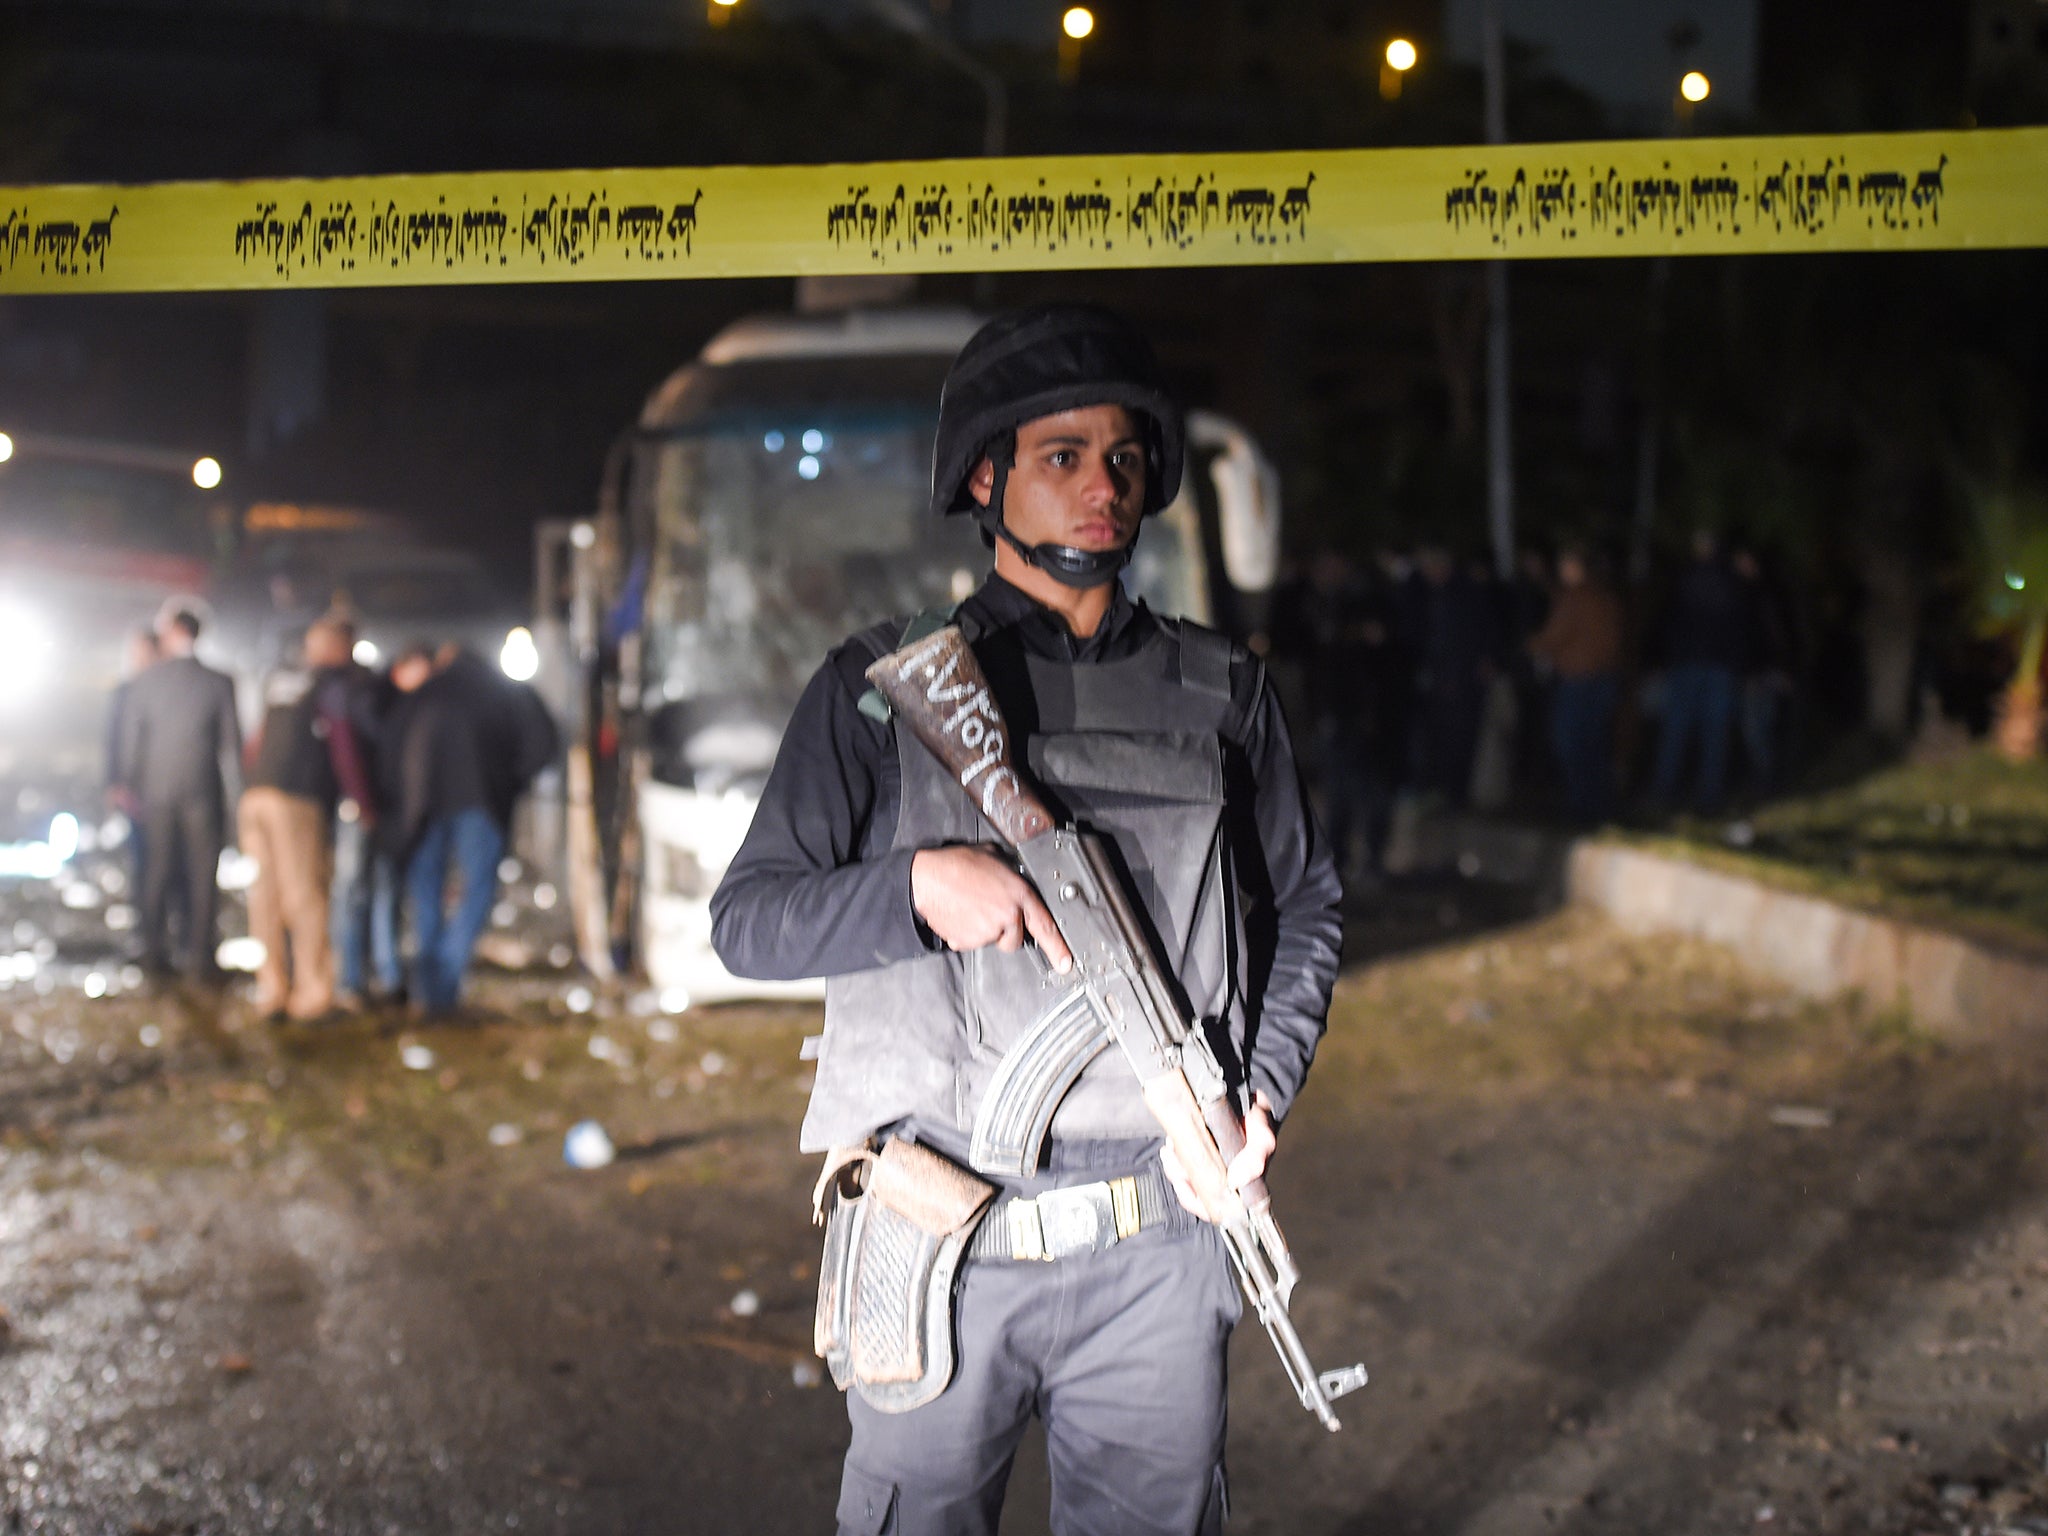 A member of the Egyptian security forces stands guard at the scene of an attack (MOHAMED EL-SHAHED/AFP/Getty Images)